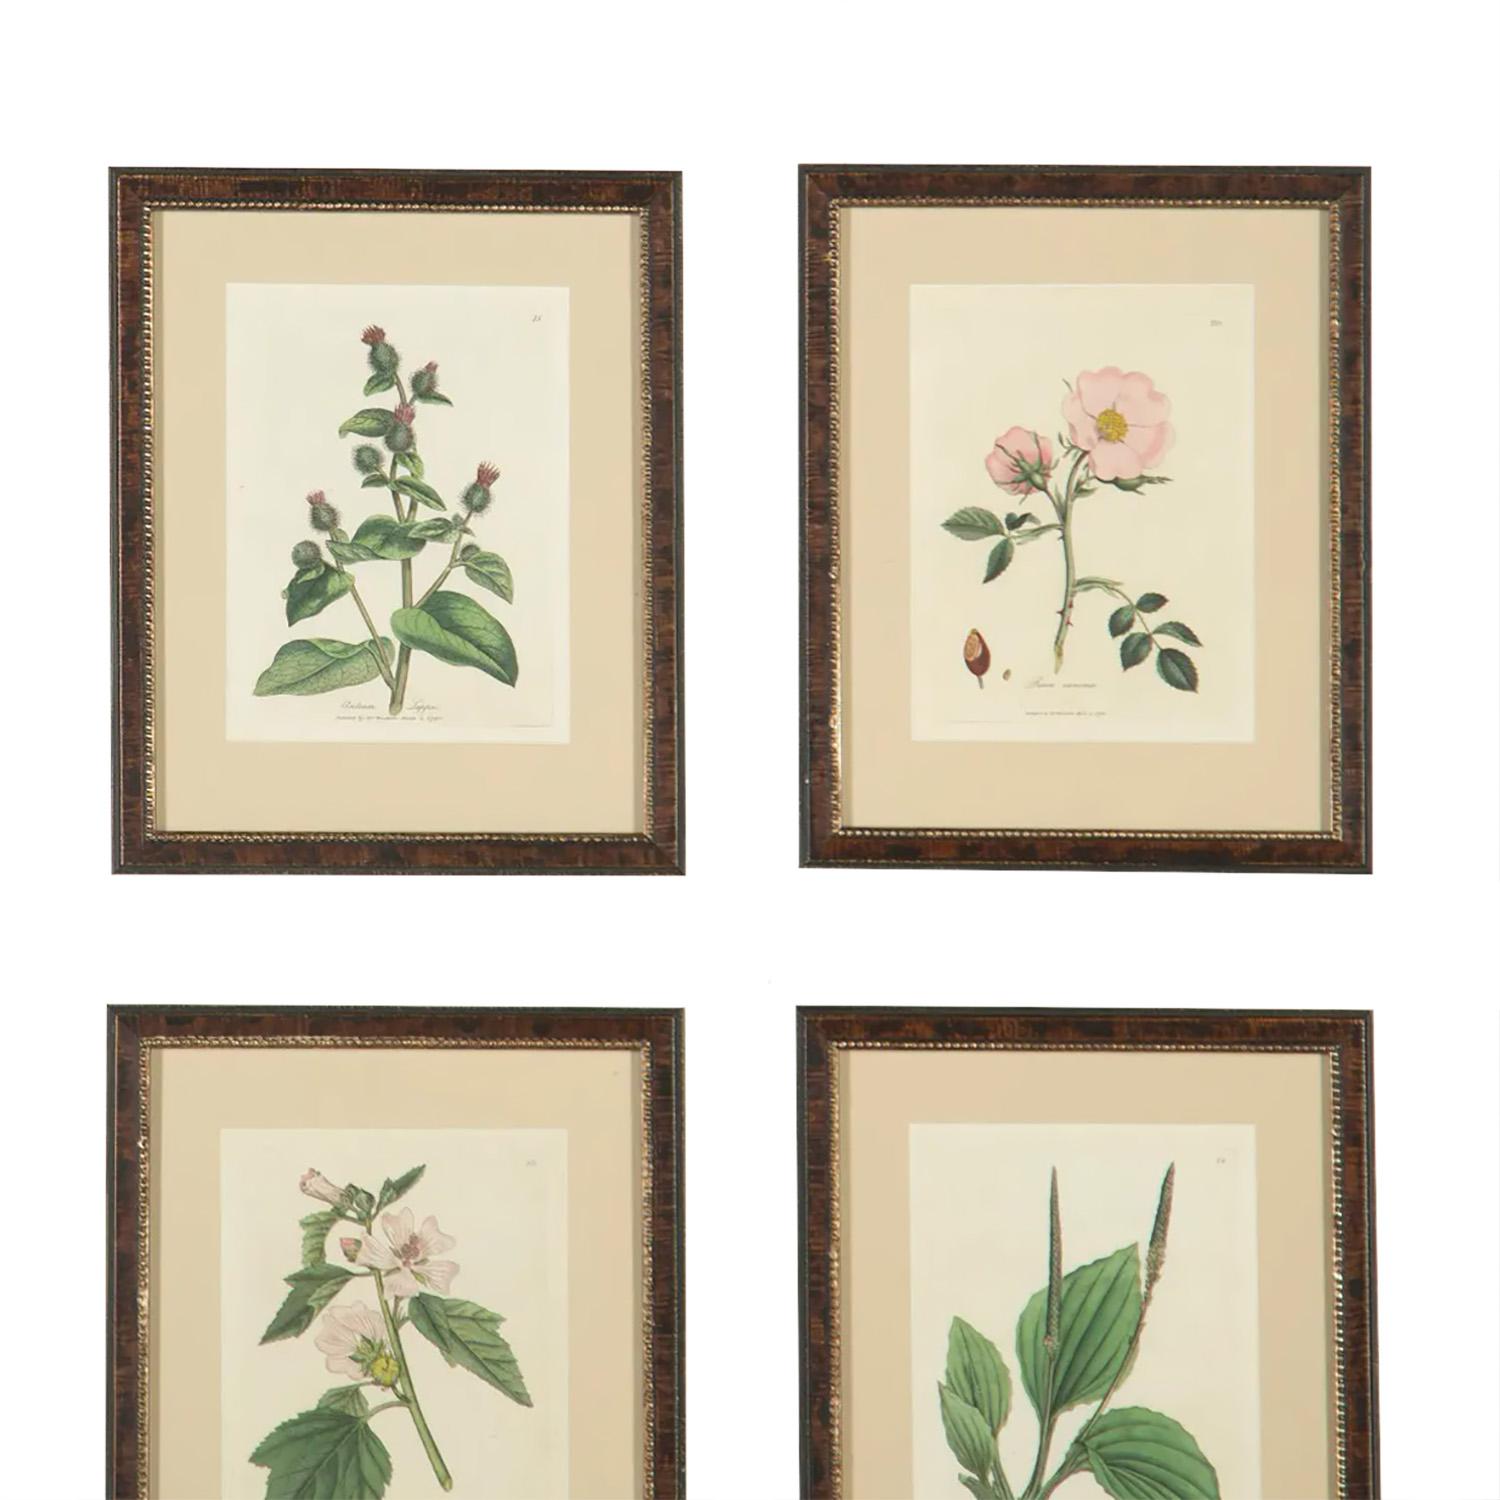 A set of 12 hand colored botanical etchings from the rare first edition, published from 1790-1795, of the “Medical Botany, Containing Systematic and General Descriptions, with Plates, of all the Medicinal Plants, Indigenous and Exotic, Comprehended